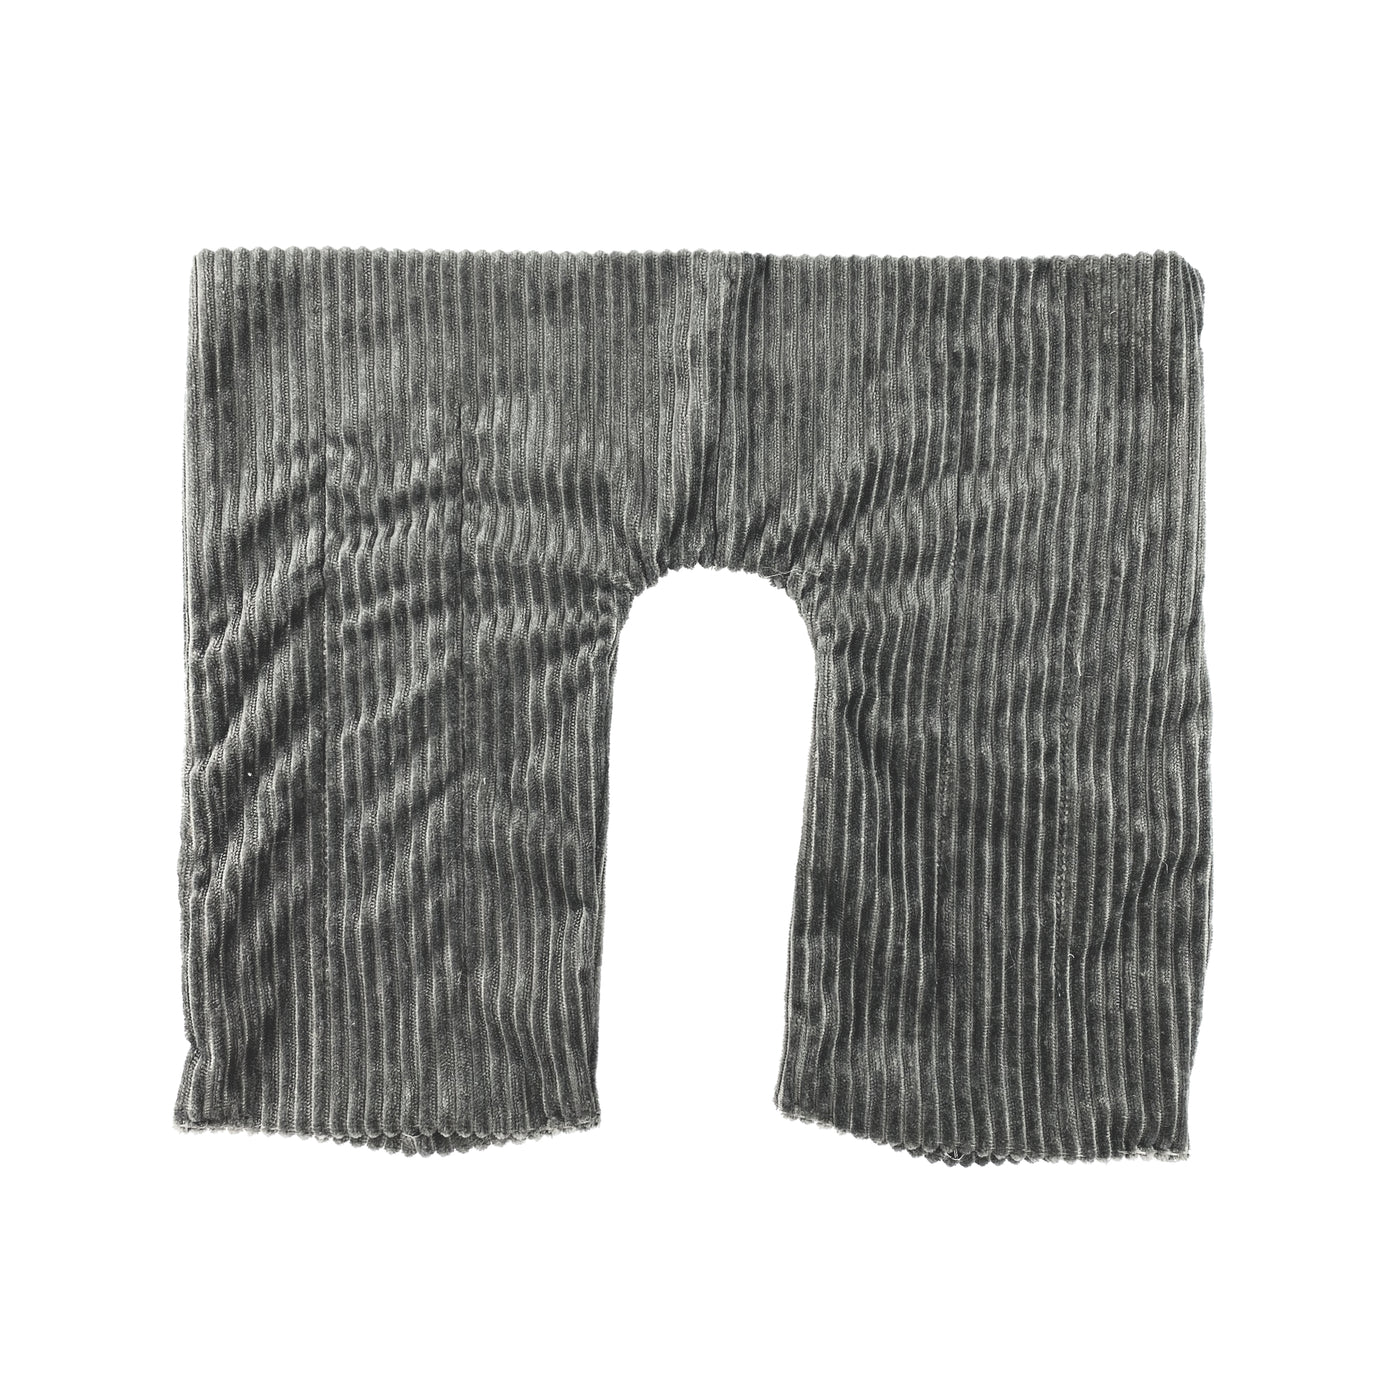 Therapeutic Shoulder and Back Wheat Heat Wrap - Dark Grey Thick Cord